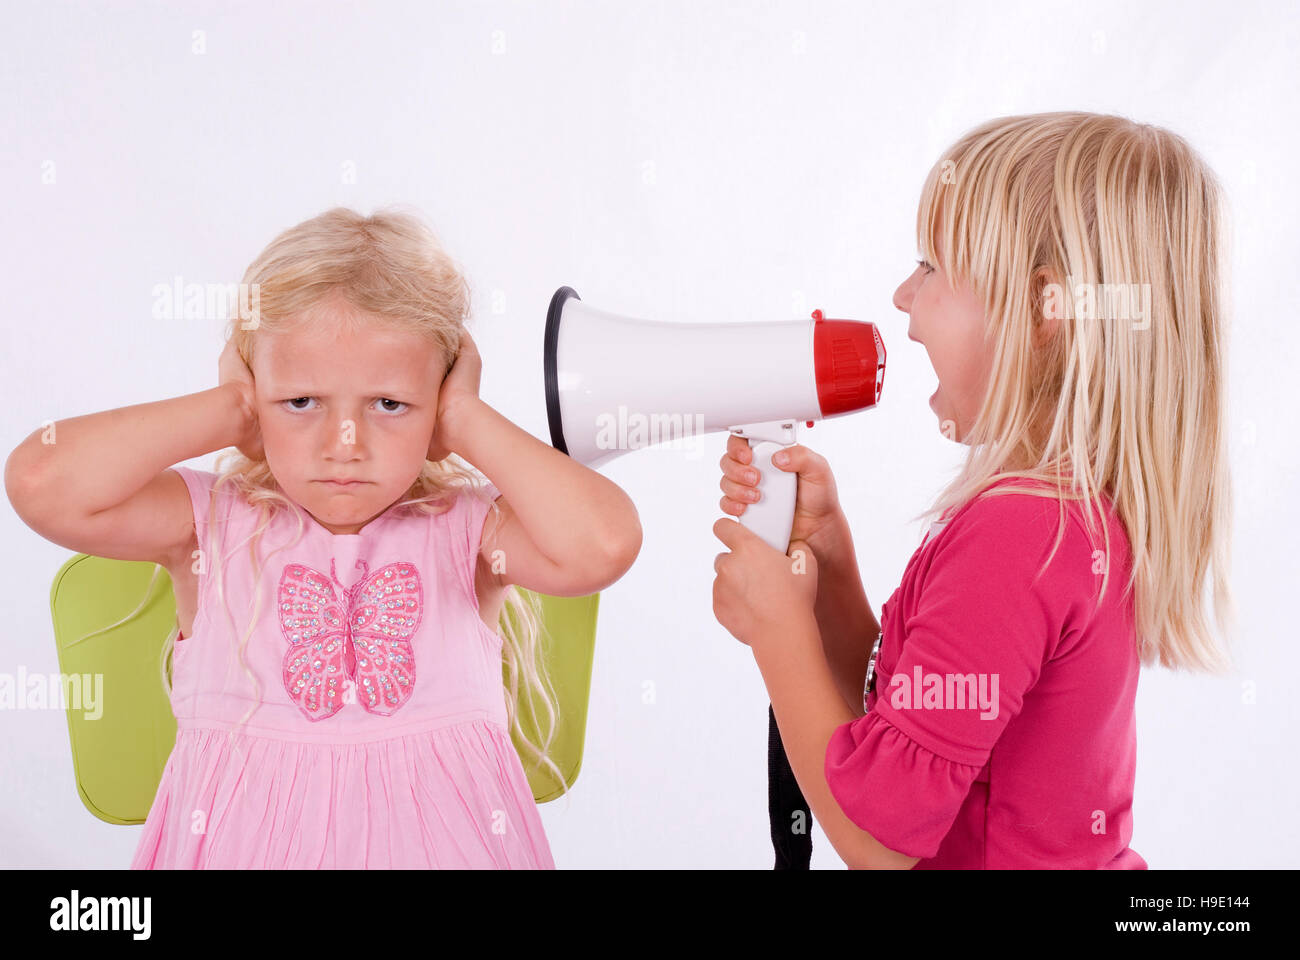 One girl screaming at another through a megaphone Stock Photo